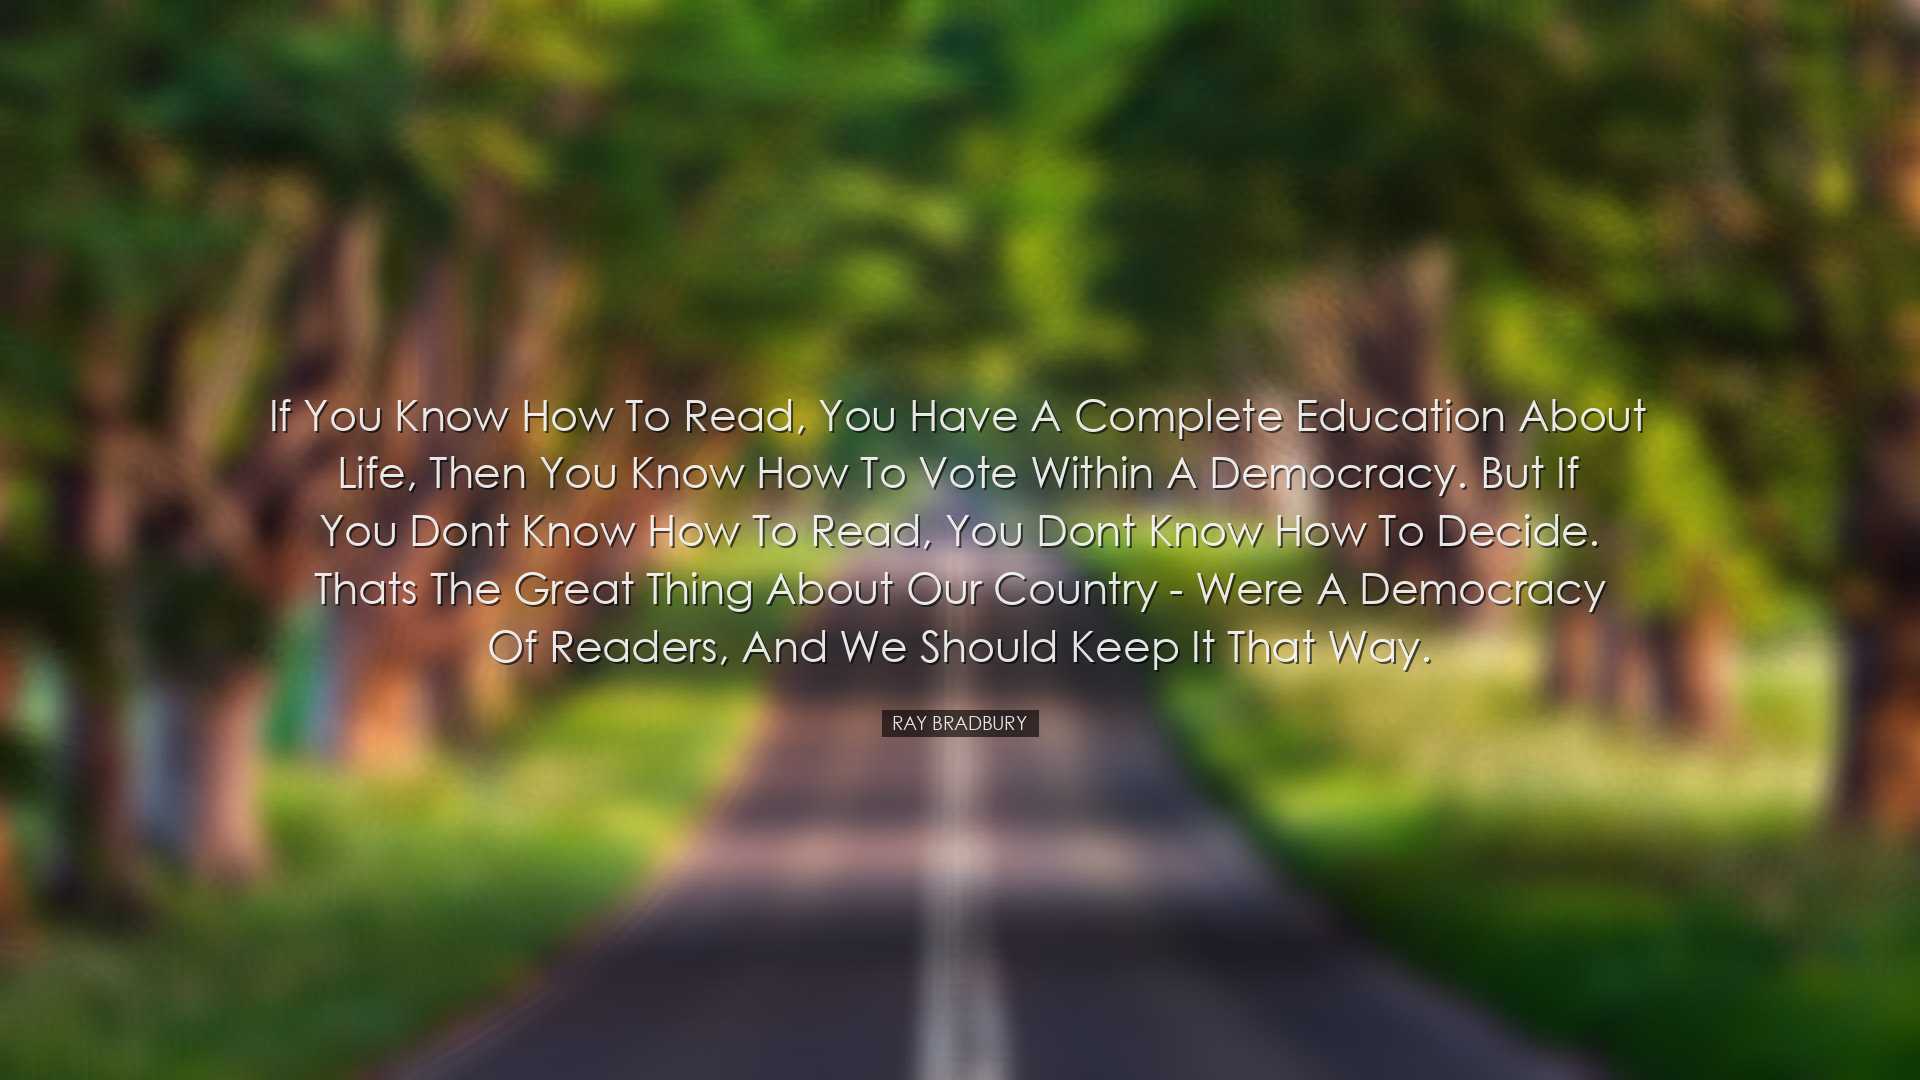 If you know how to read, you have a complete education about life,